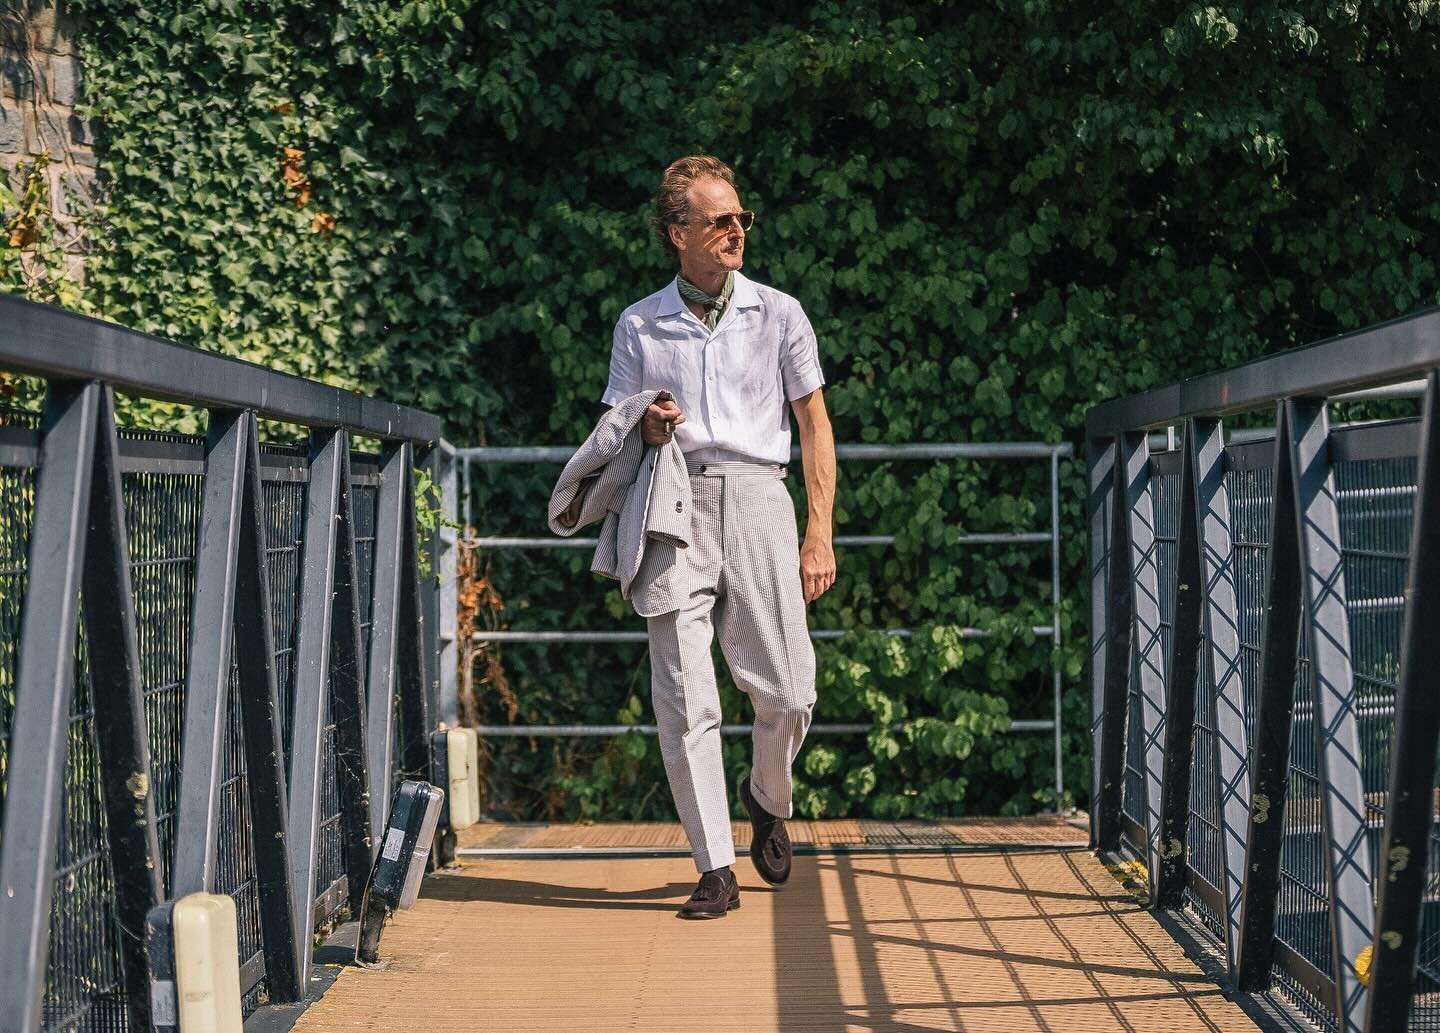 Board Walk.

If there is only space for one Suit in your suitcase this summer; make it a seersucker..

Designed not only to keep you cool, but also to be crease resistant. 

And if the candy-coloured stripes don&rsquo;t do it for you, seersucker is a